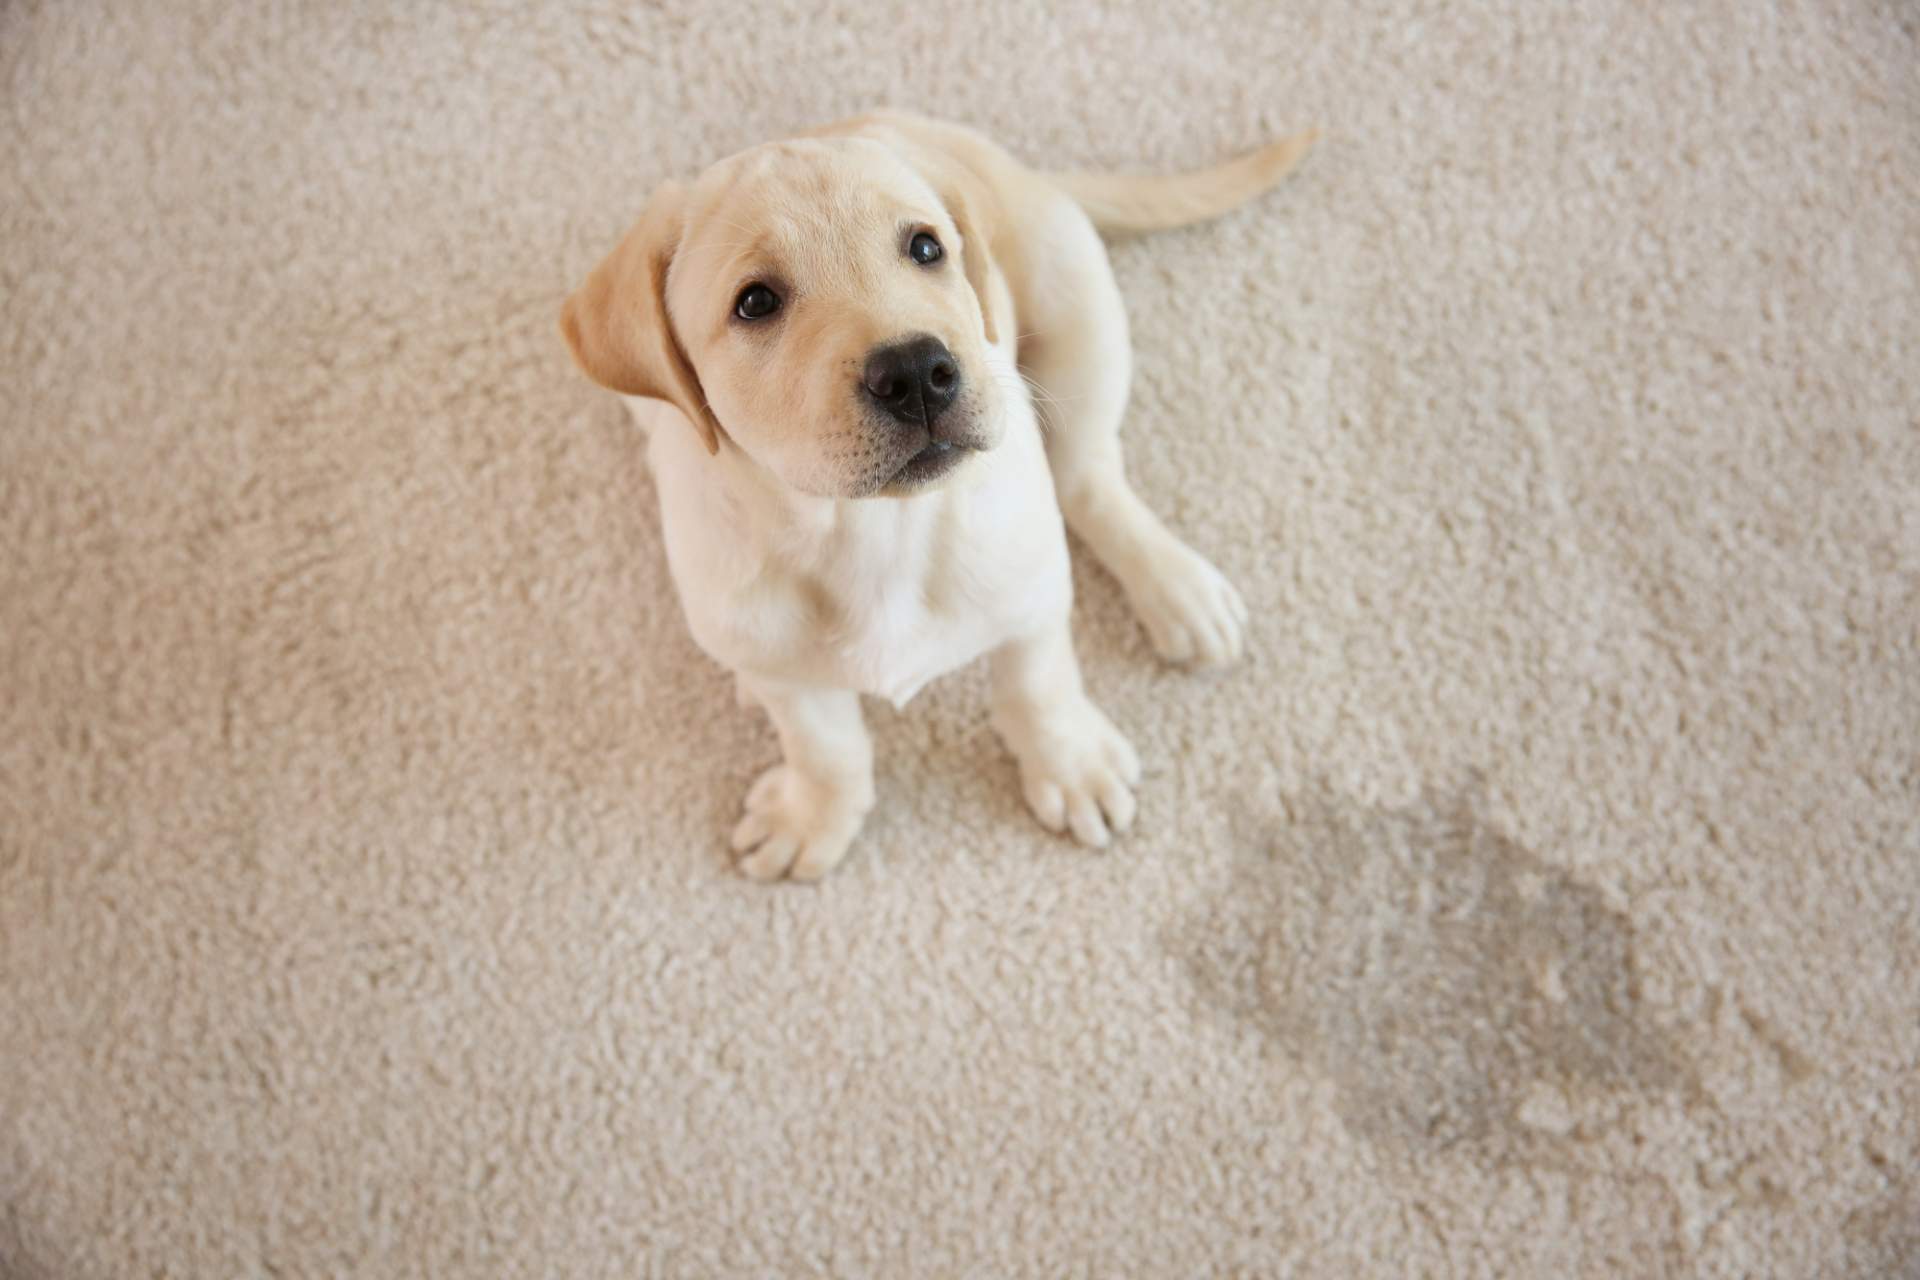 Puppy looking up after peeing on carpet